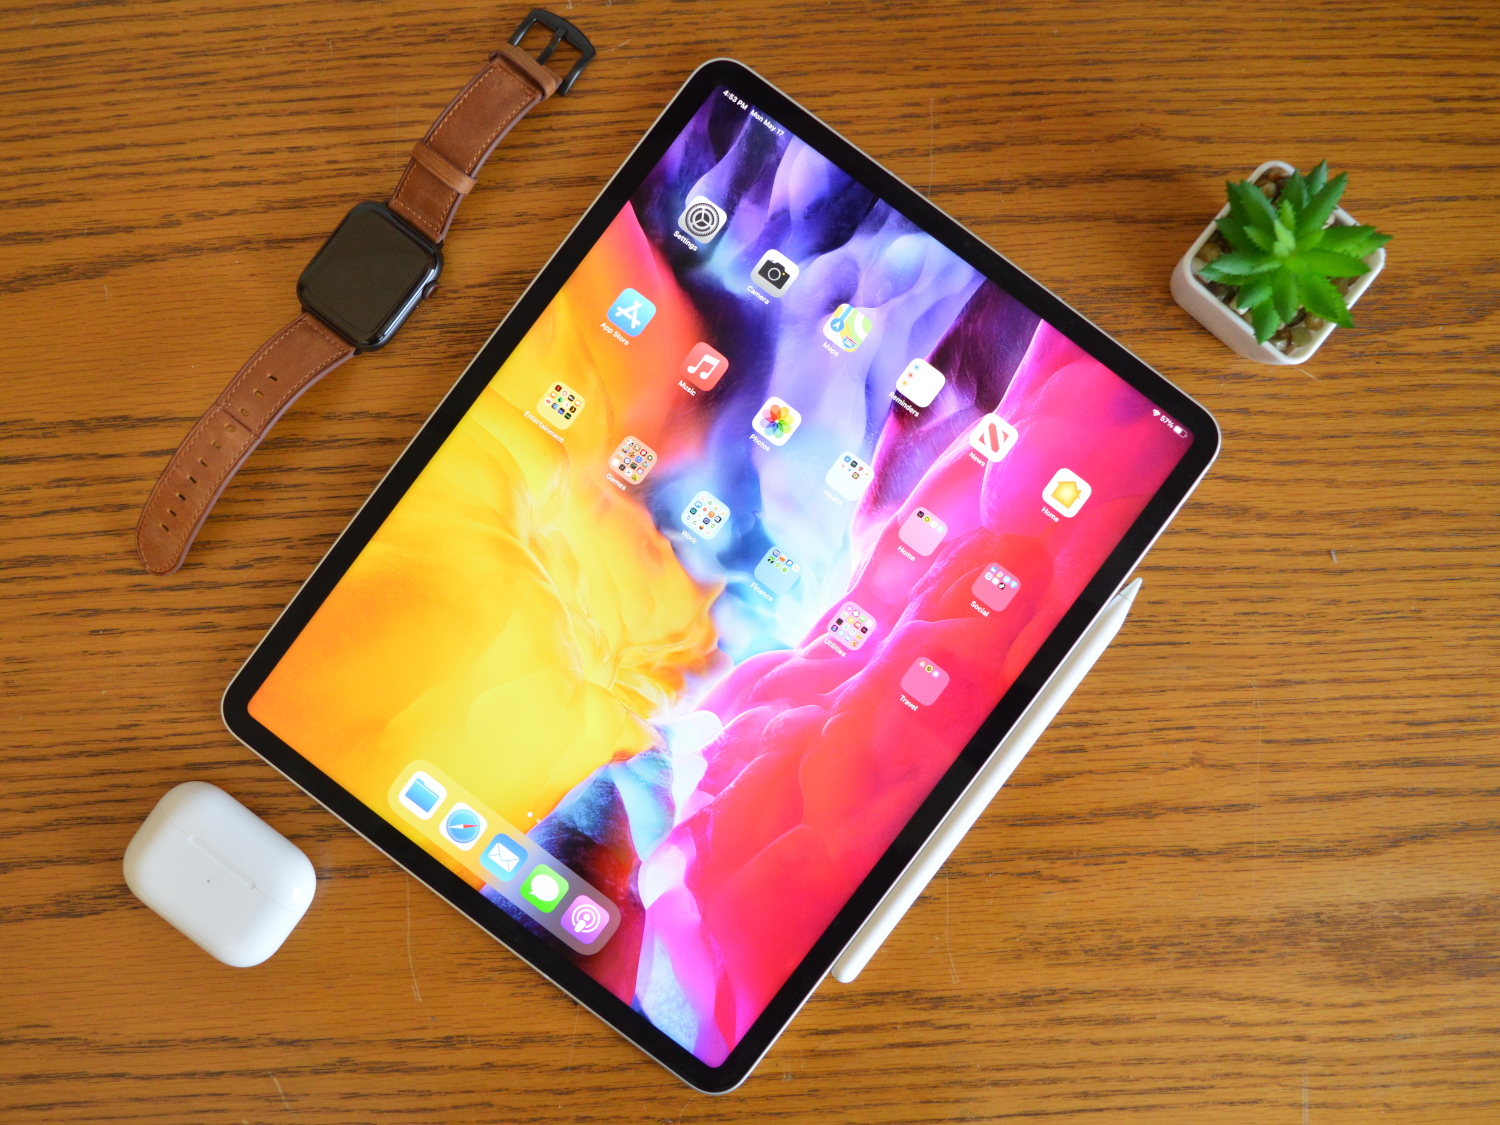 Apple's 2020 iPad Pro will feature major camera upgrades and a